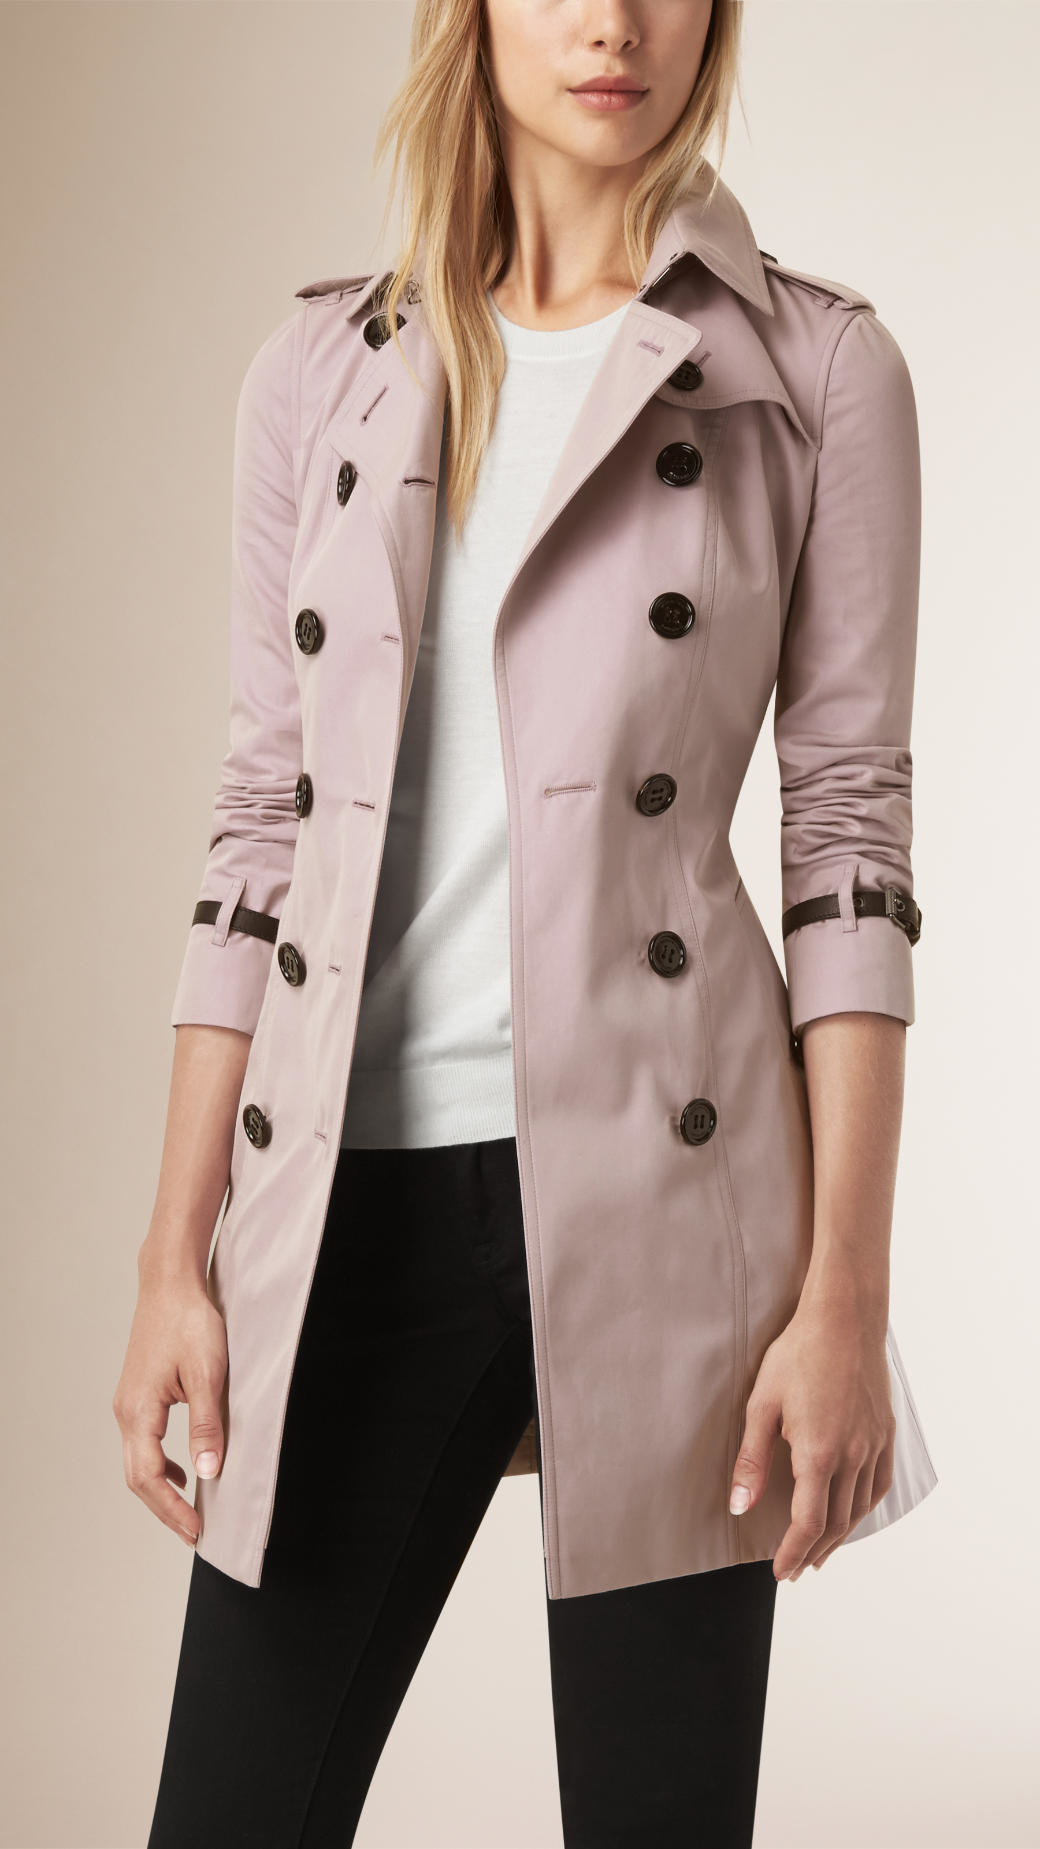 Lyst - Burberry Leather Trim Cotton Gabardine Trench Coat Pale Mauve in ...